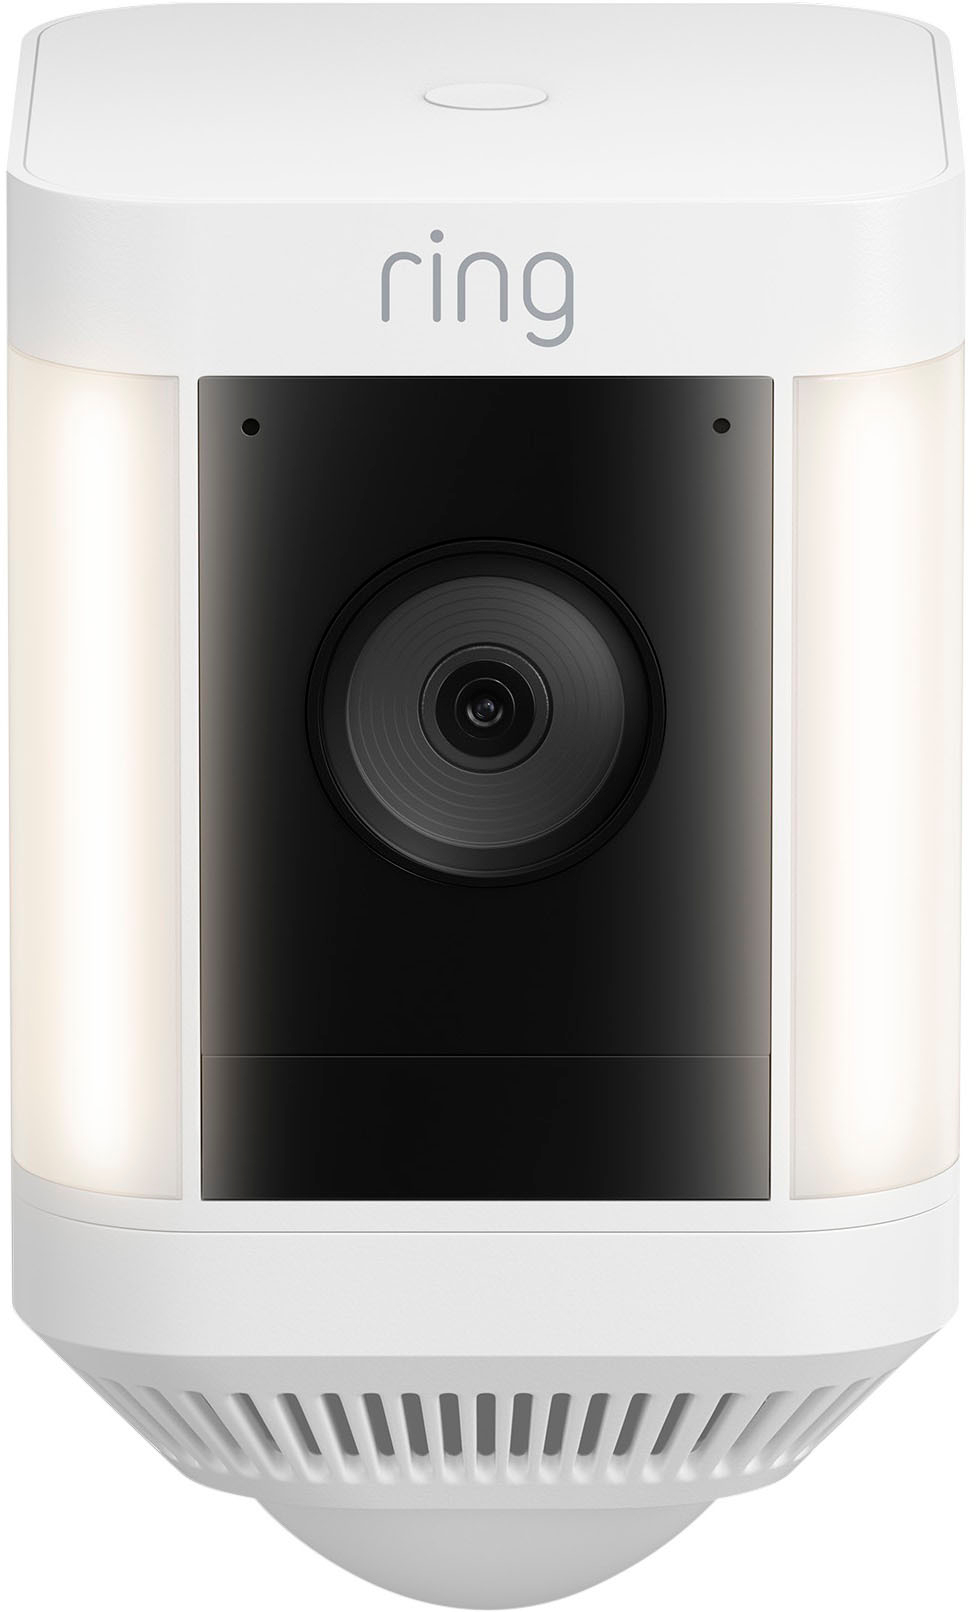 Ring Spotlight Cam Plus, Battery - Smart Security Video Camera with LED  Lights, 2-Way Talk, Color Night Vision, White B09JZ5BG26 - The Home Depot